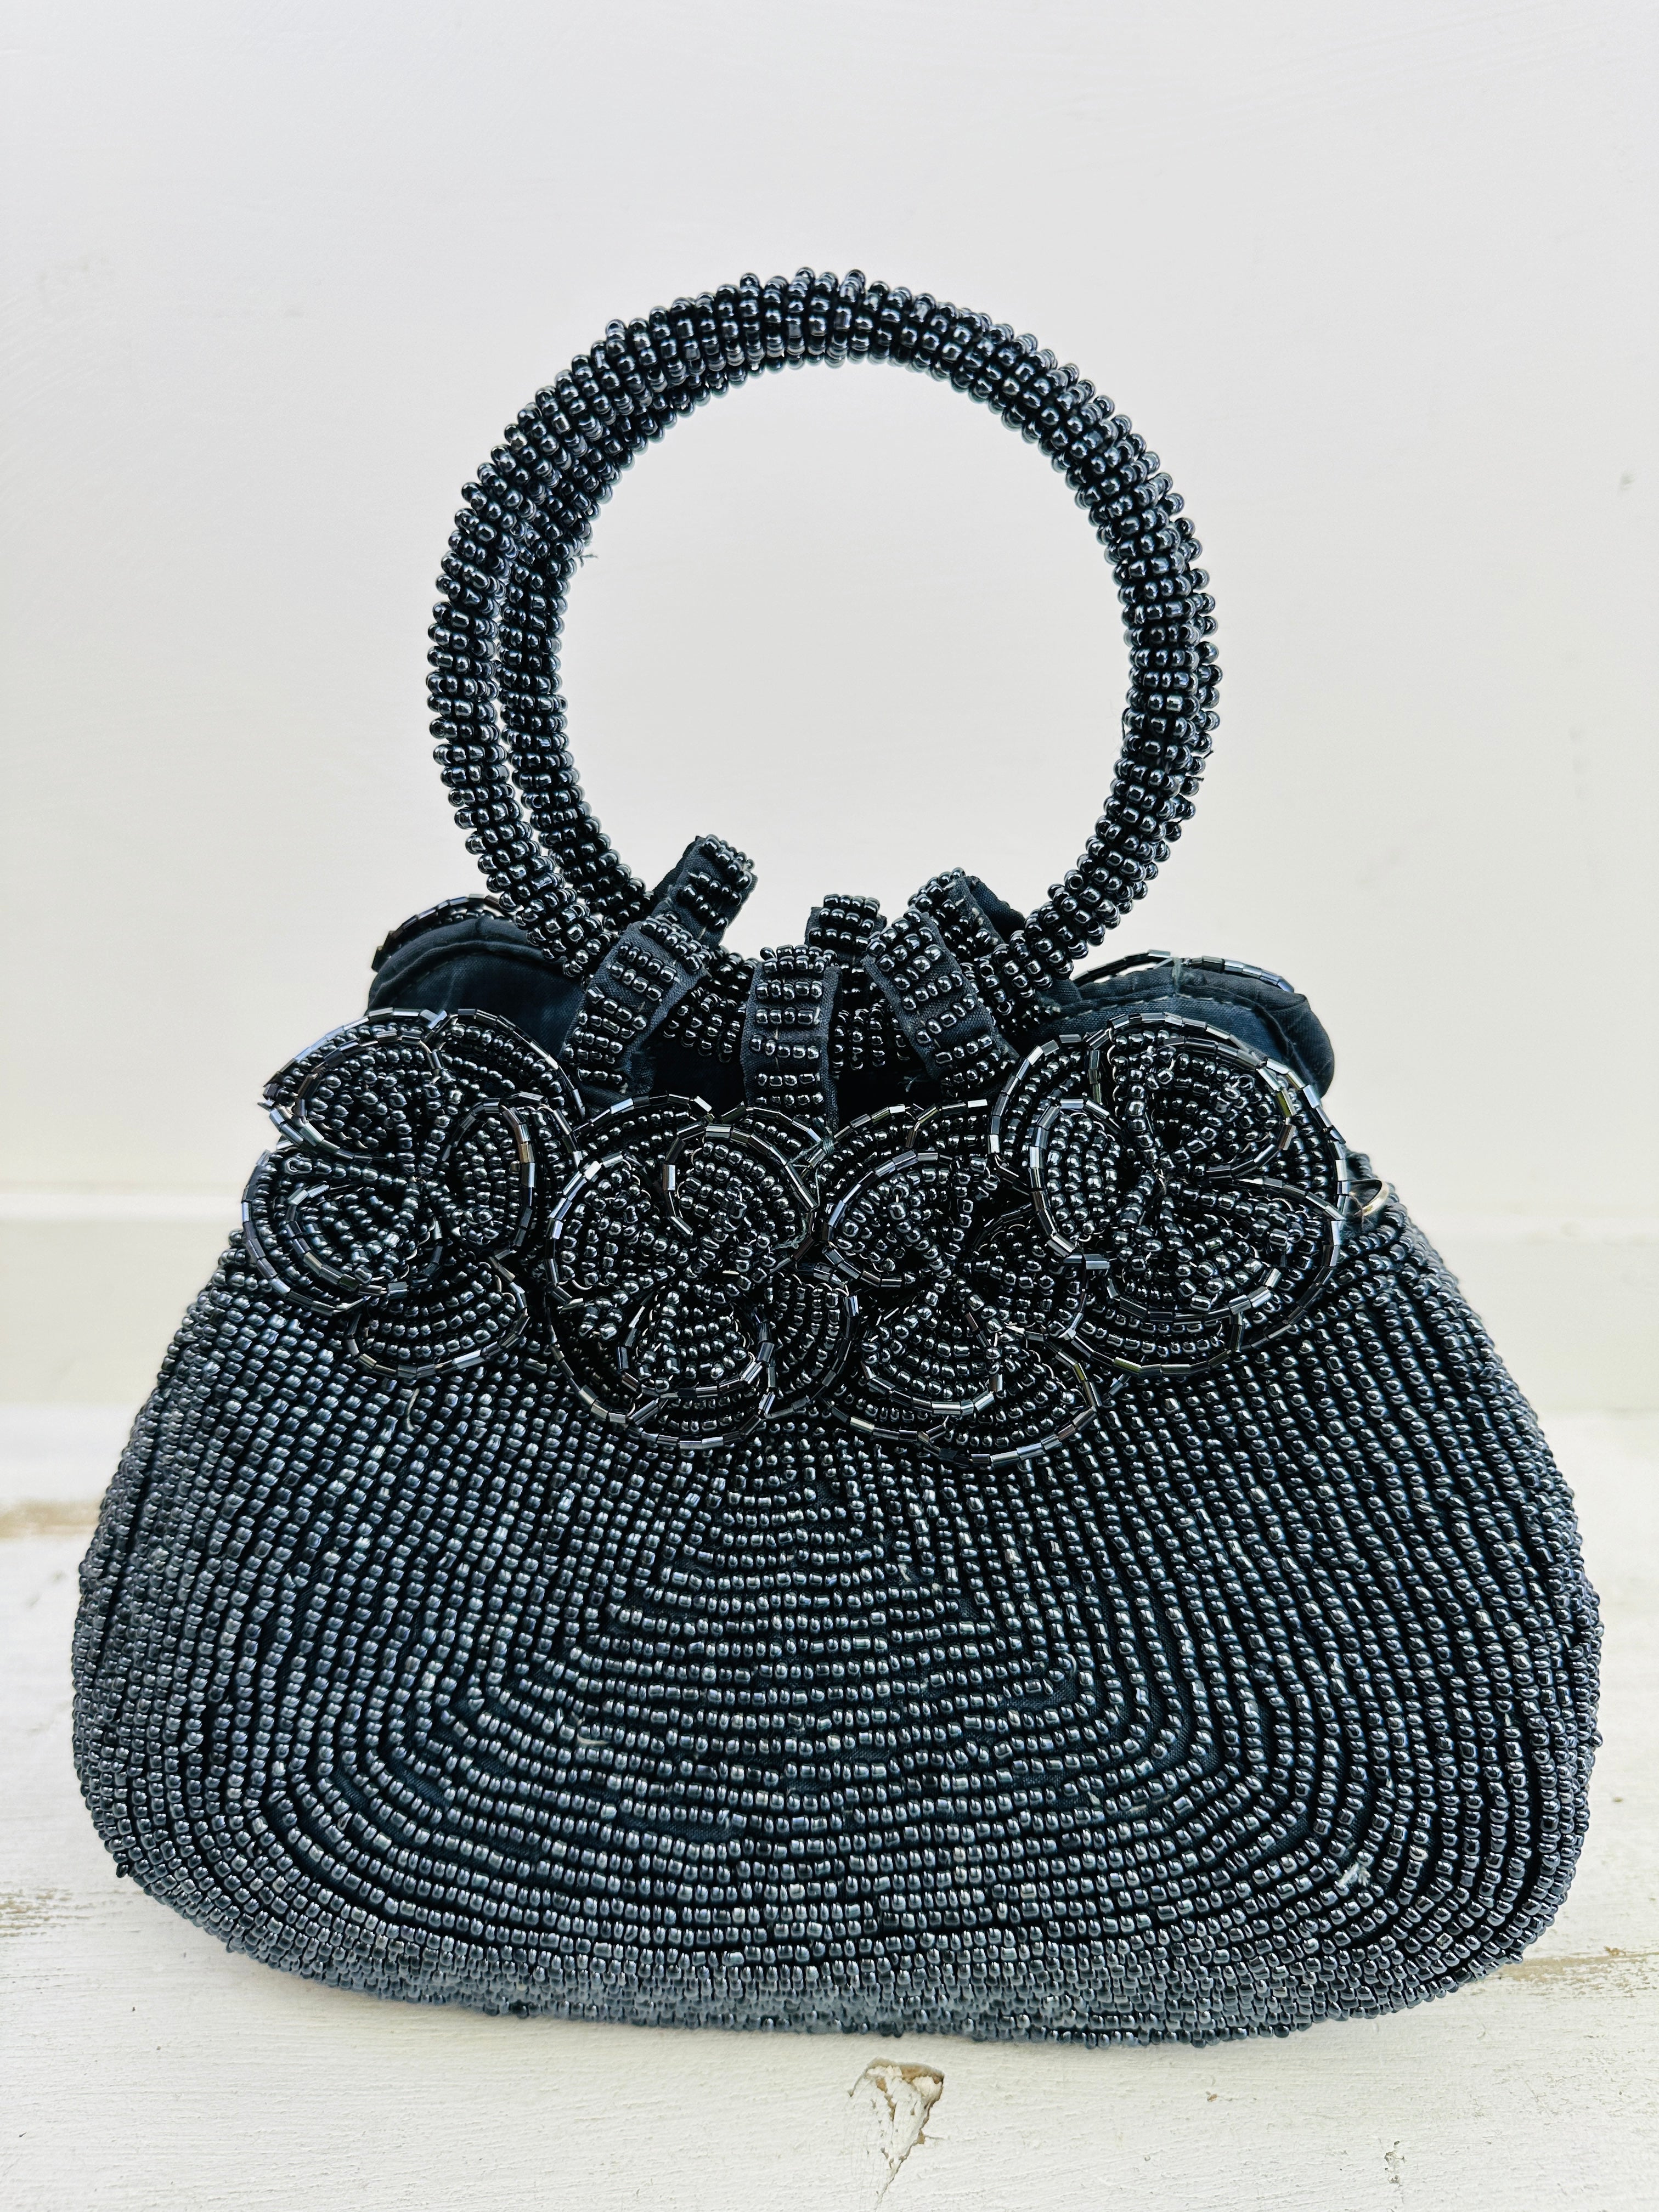 front view of beaded handbag with beaded flowers on bag